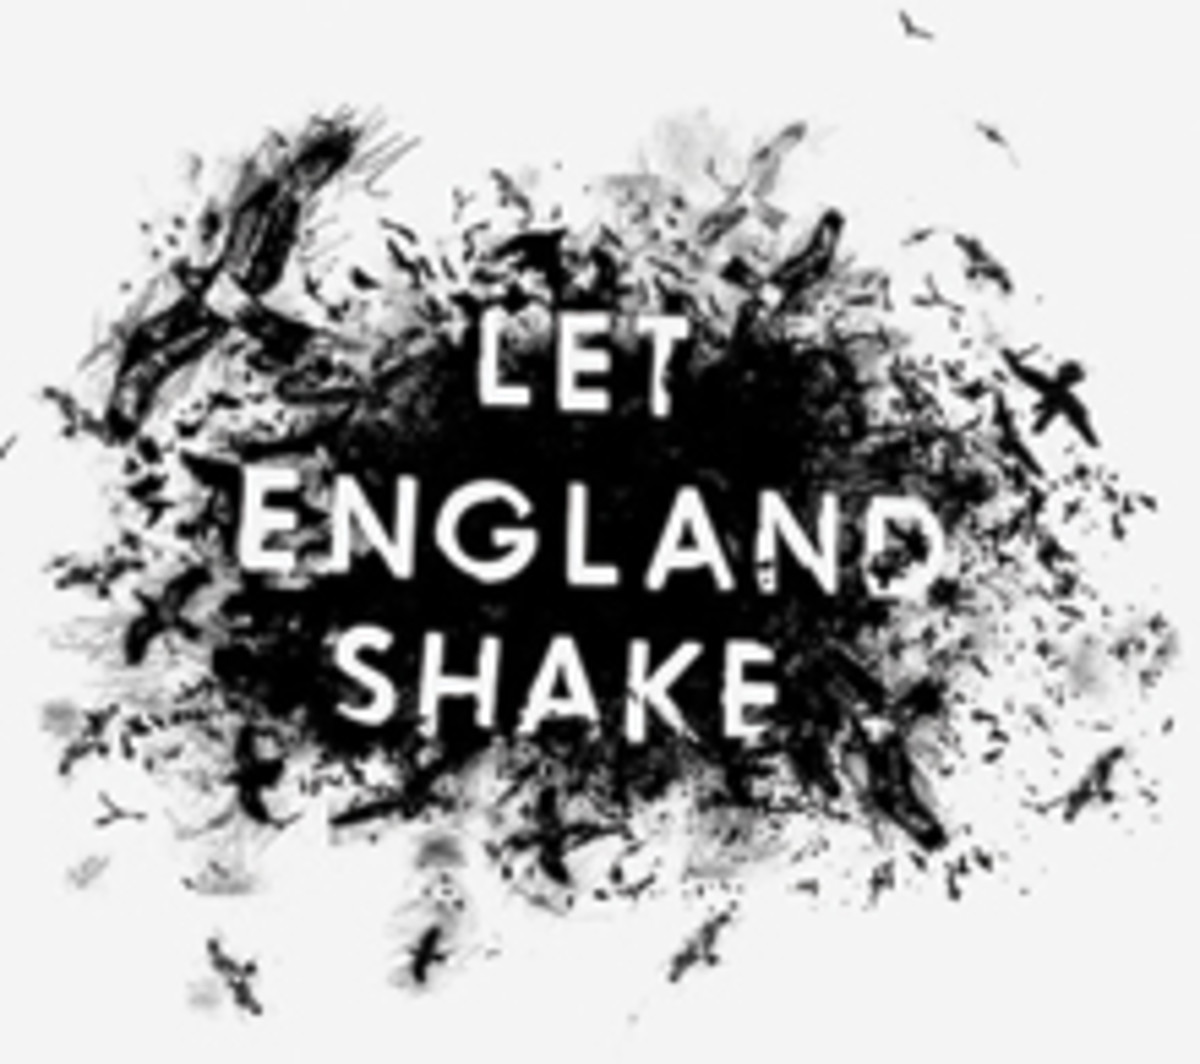 PJ Harvey’s eighth studio album, which is titled Let England Shake, is slated for release in February 2011